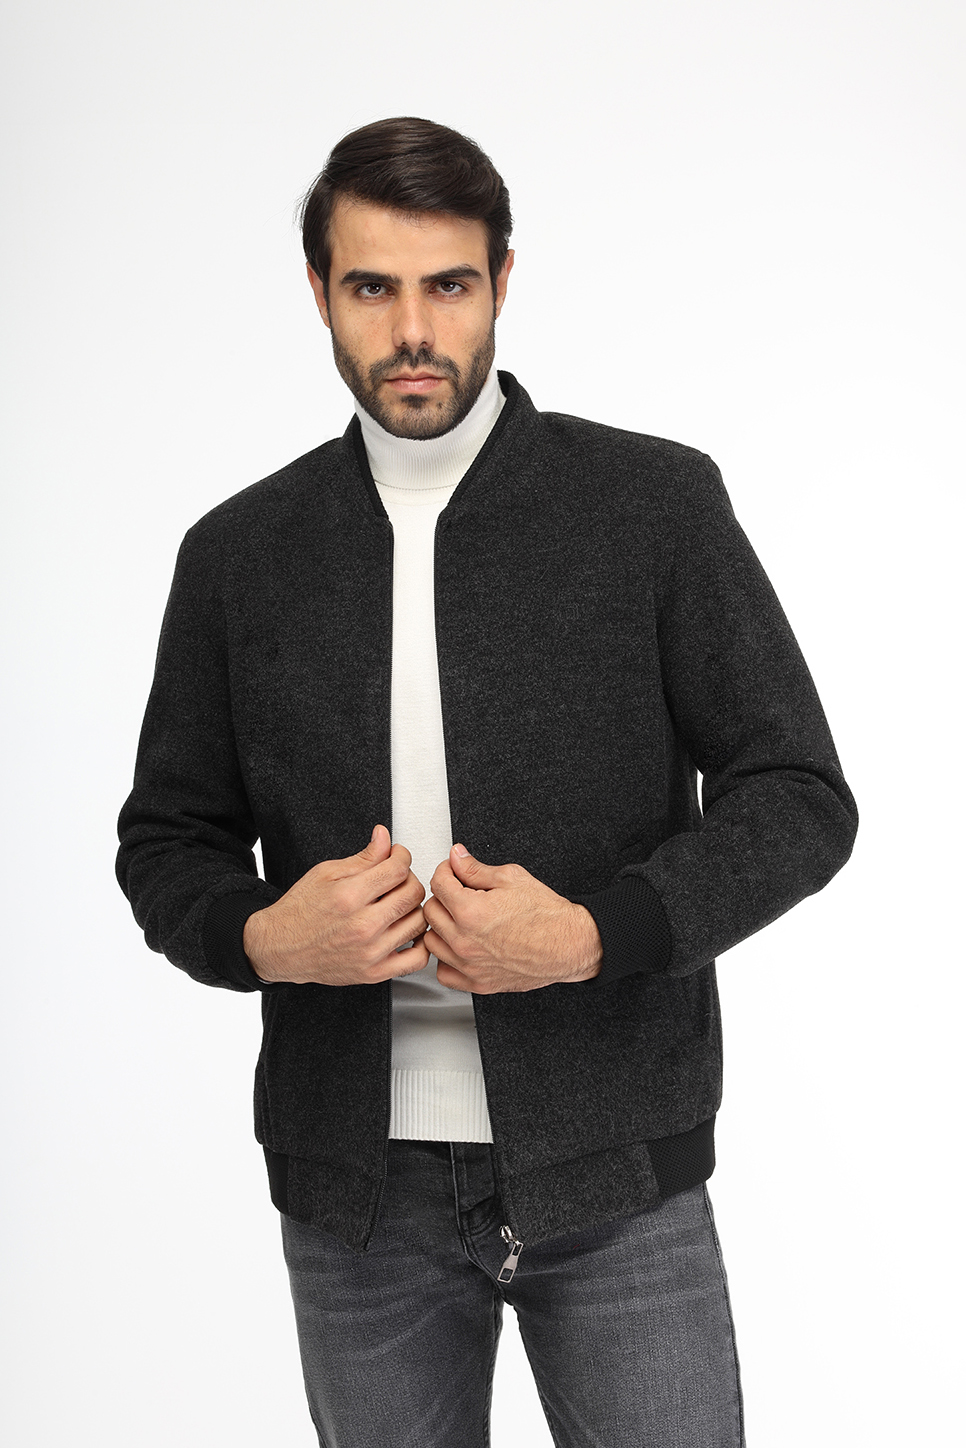 Regular Fit Sweater Gray - TIE HOUSE